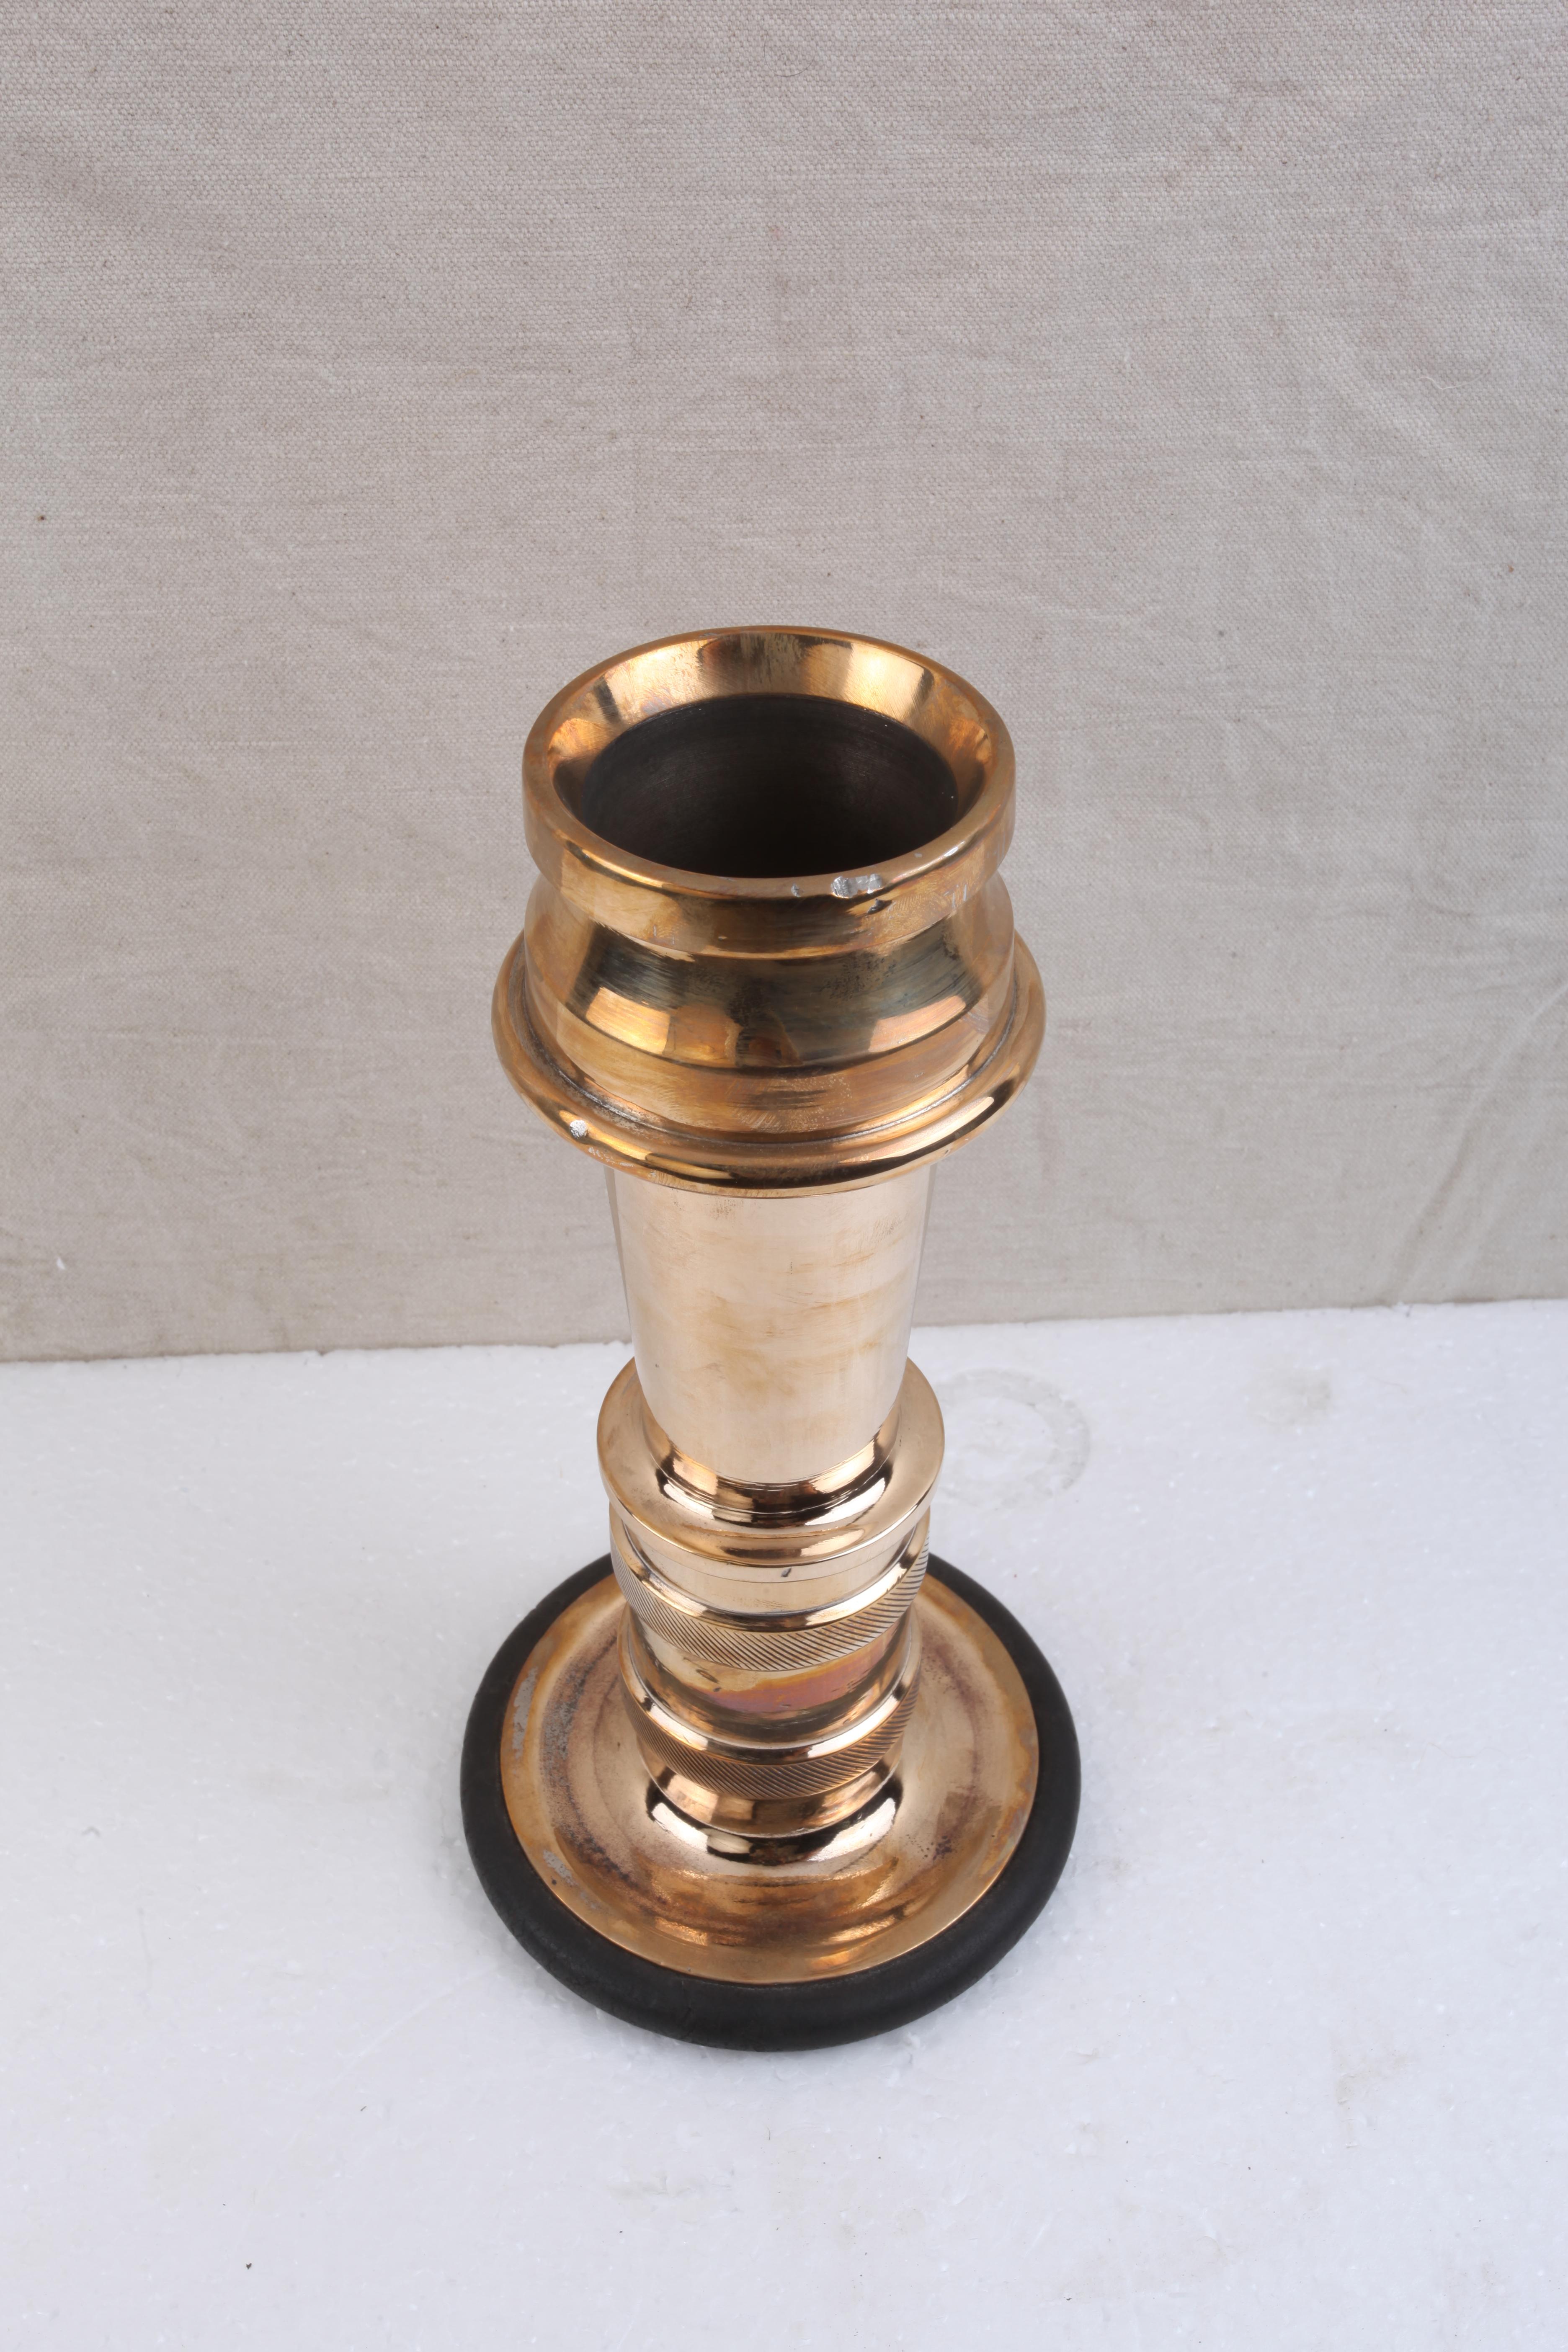 Industrial Brass Vases or Candlestands Originally Fire-Hose Nozzles